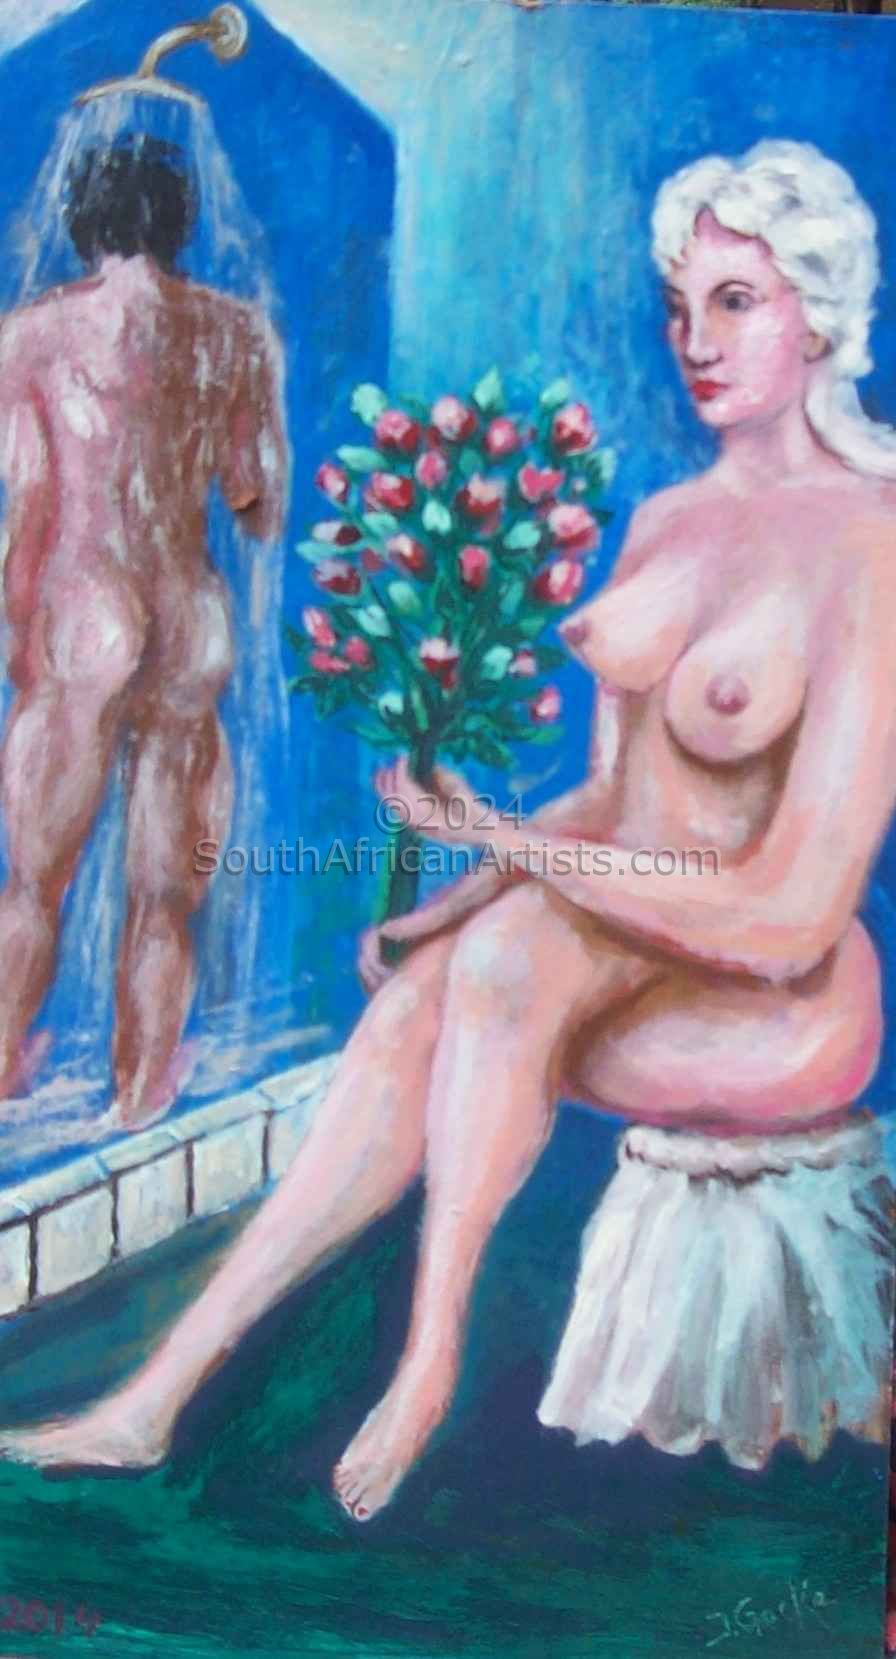 The Shower and Roses